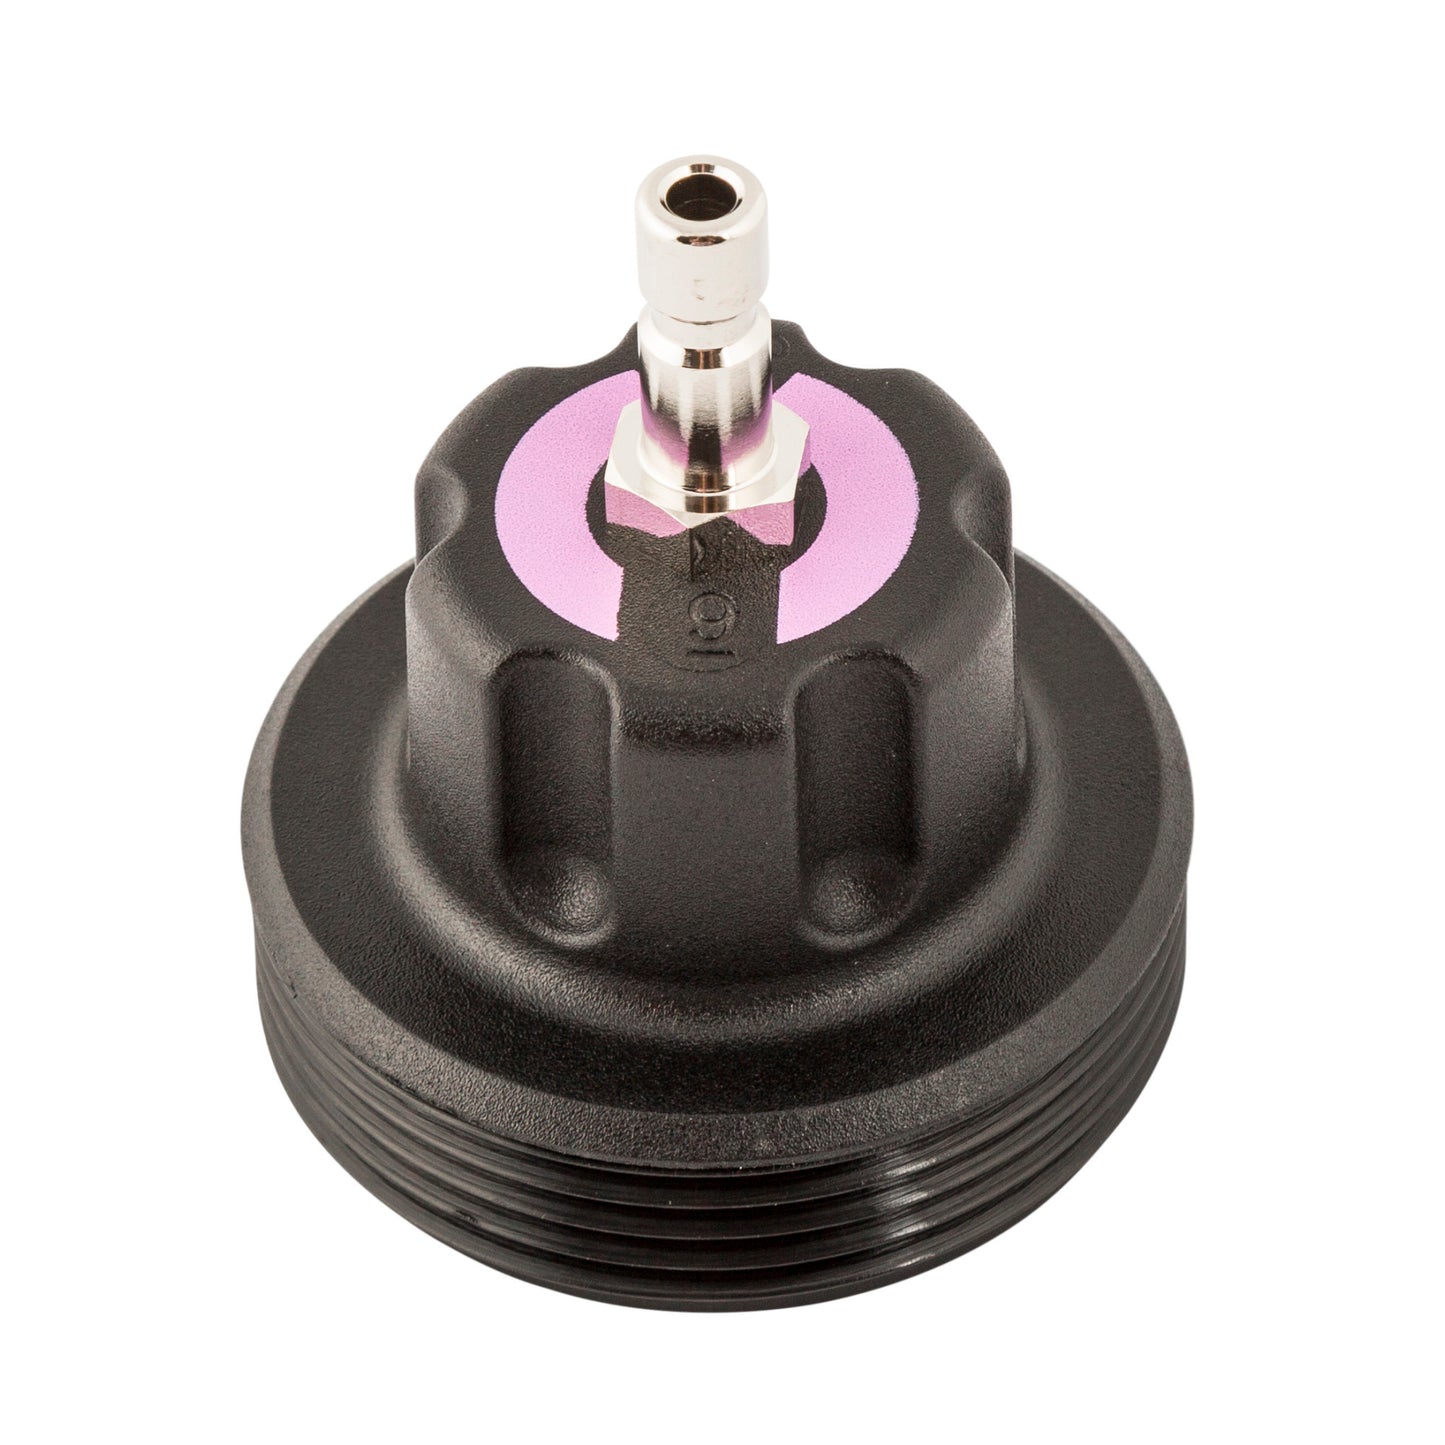 Nylon NO.9 Radiator Expansion Tank Test System Adapter for Audi, BMW, Porsche, Seat, Skoda, and VW Vehicles